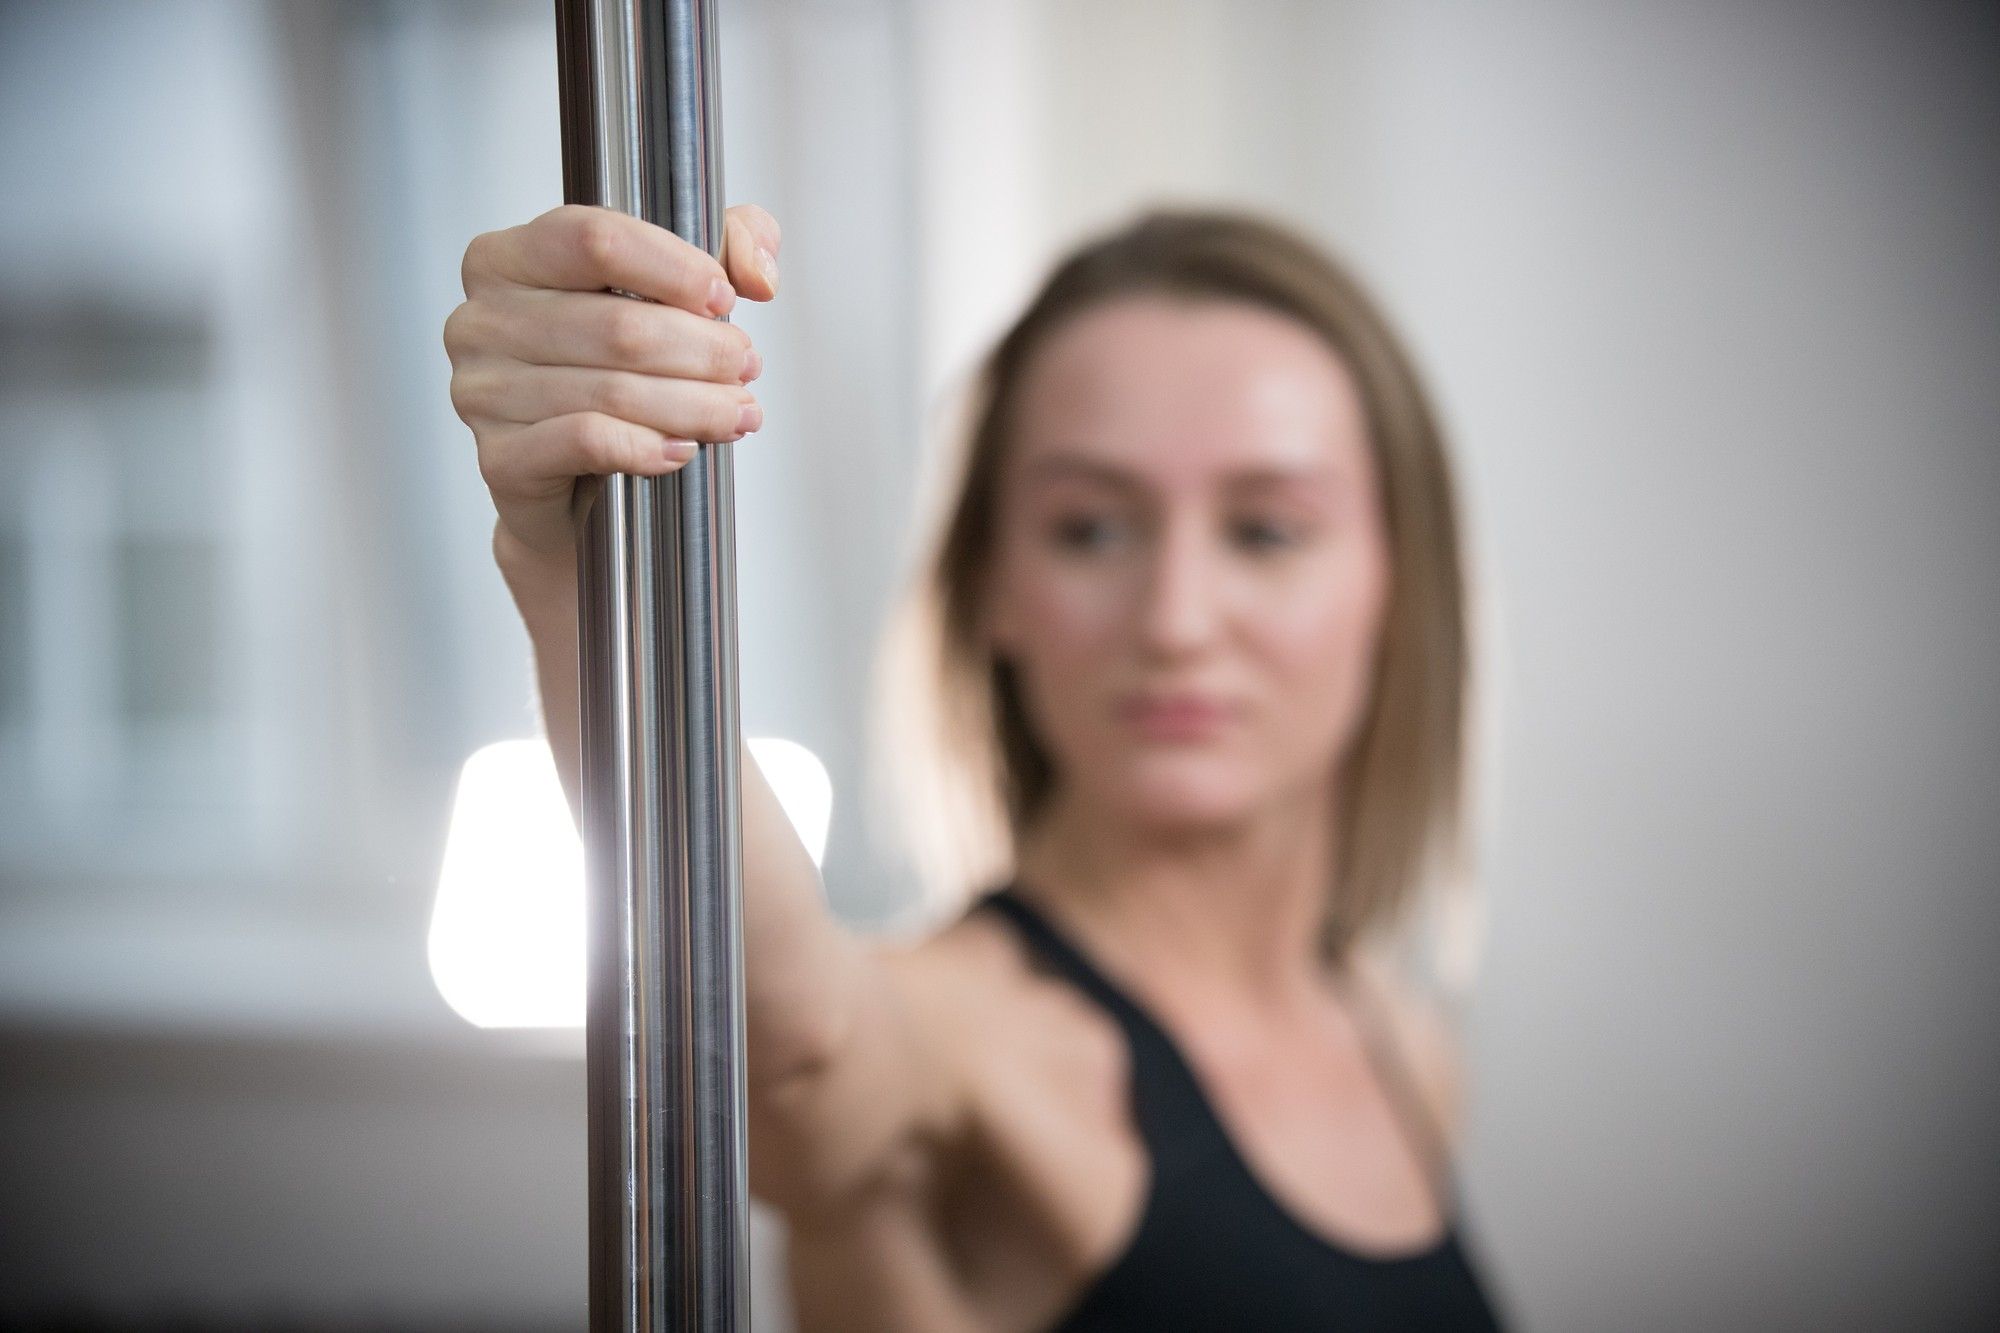 A pole dance class on Zoom was allegedly interrupted.